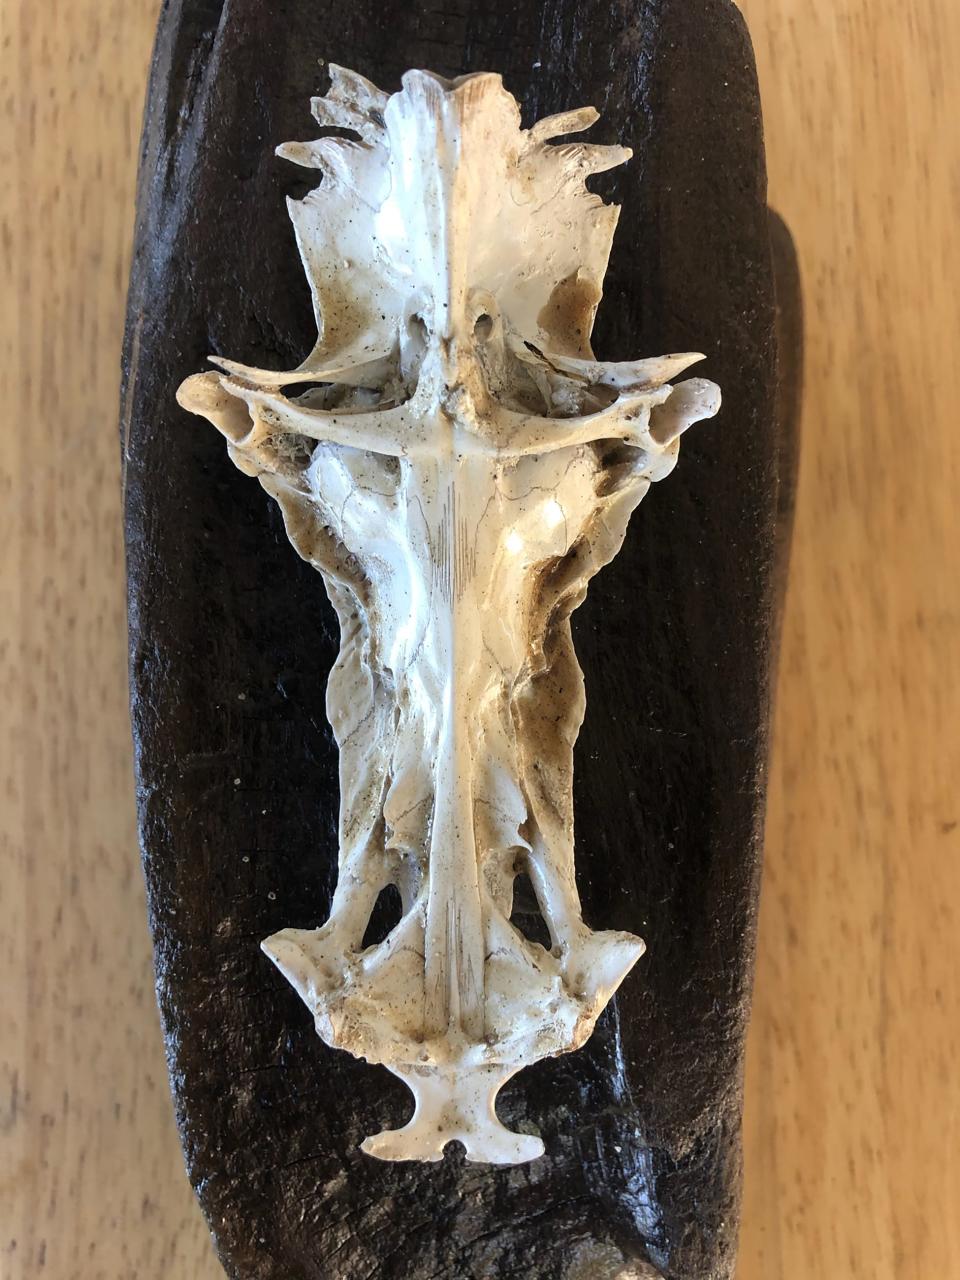 Legend surrounds the skulls of saltwater catfish because the undersides resemble a crucifix.